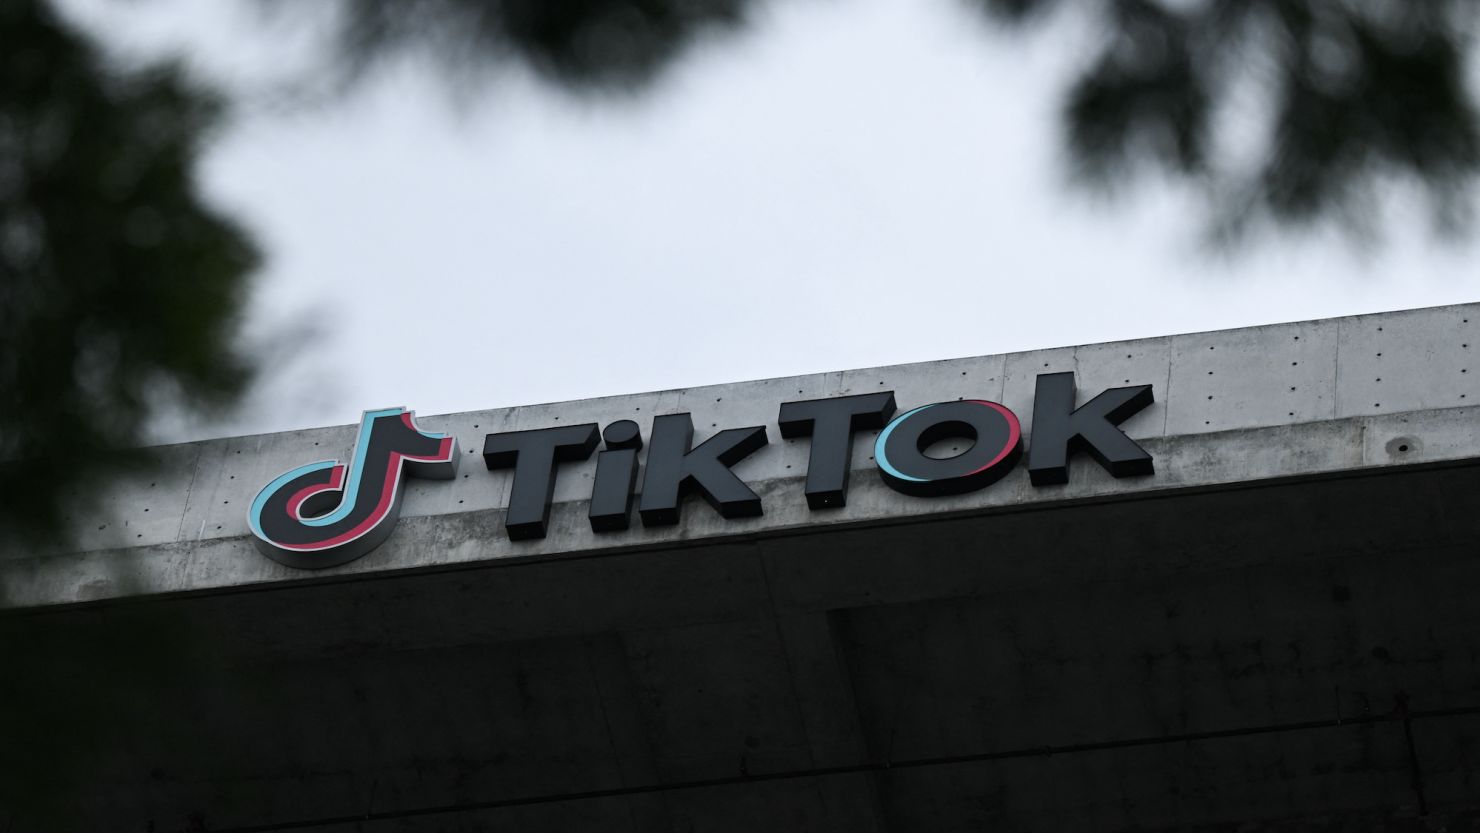 The TikTok logo is displayed on signage outside TikTok social media app company offices in Culver City, California, on March 16, 2023. - China urged the United States to stop "unreasonably suppressing" TikTok on March 16, 2023, after Washington gave the popular video-sharing app an ultimatum to part ways with its Chinese owners or face a nationwide ban. (Photo by Patrick T. Fallon / AFP) (Photo by PATRICK T. FALLON/AFP via Getty Images)